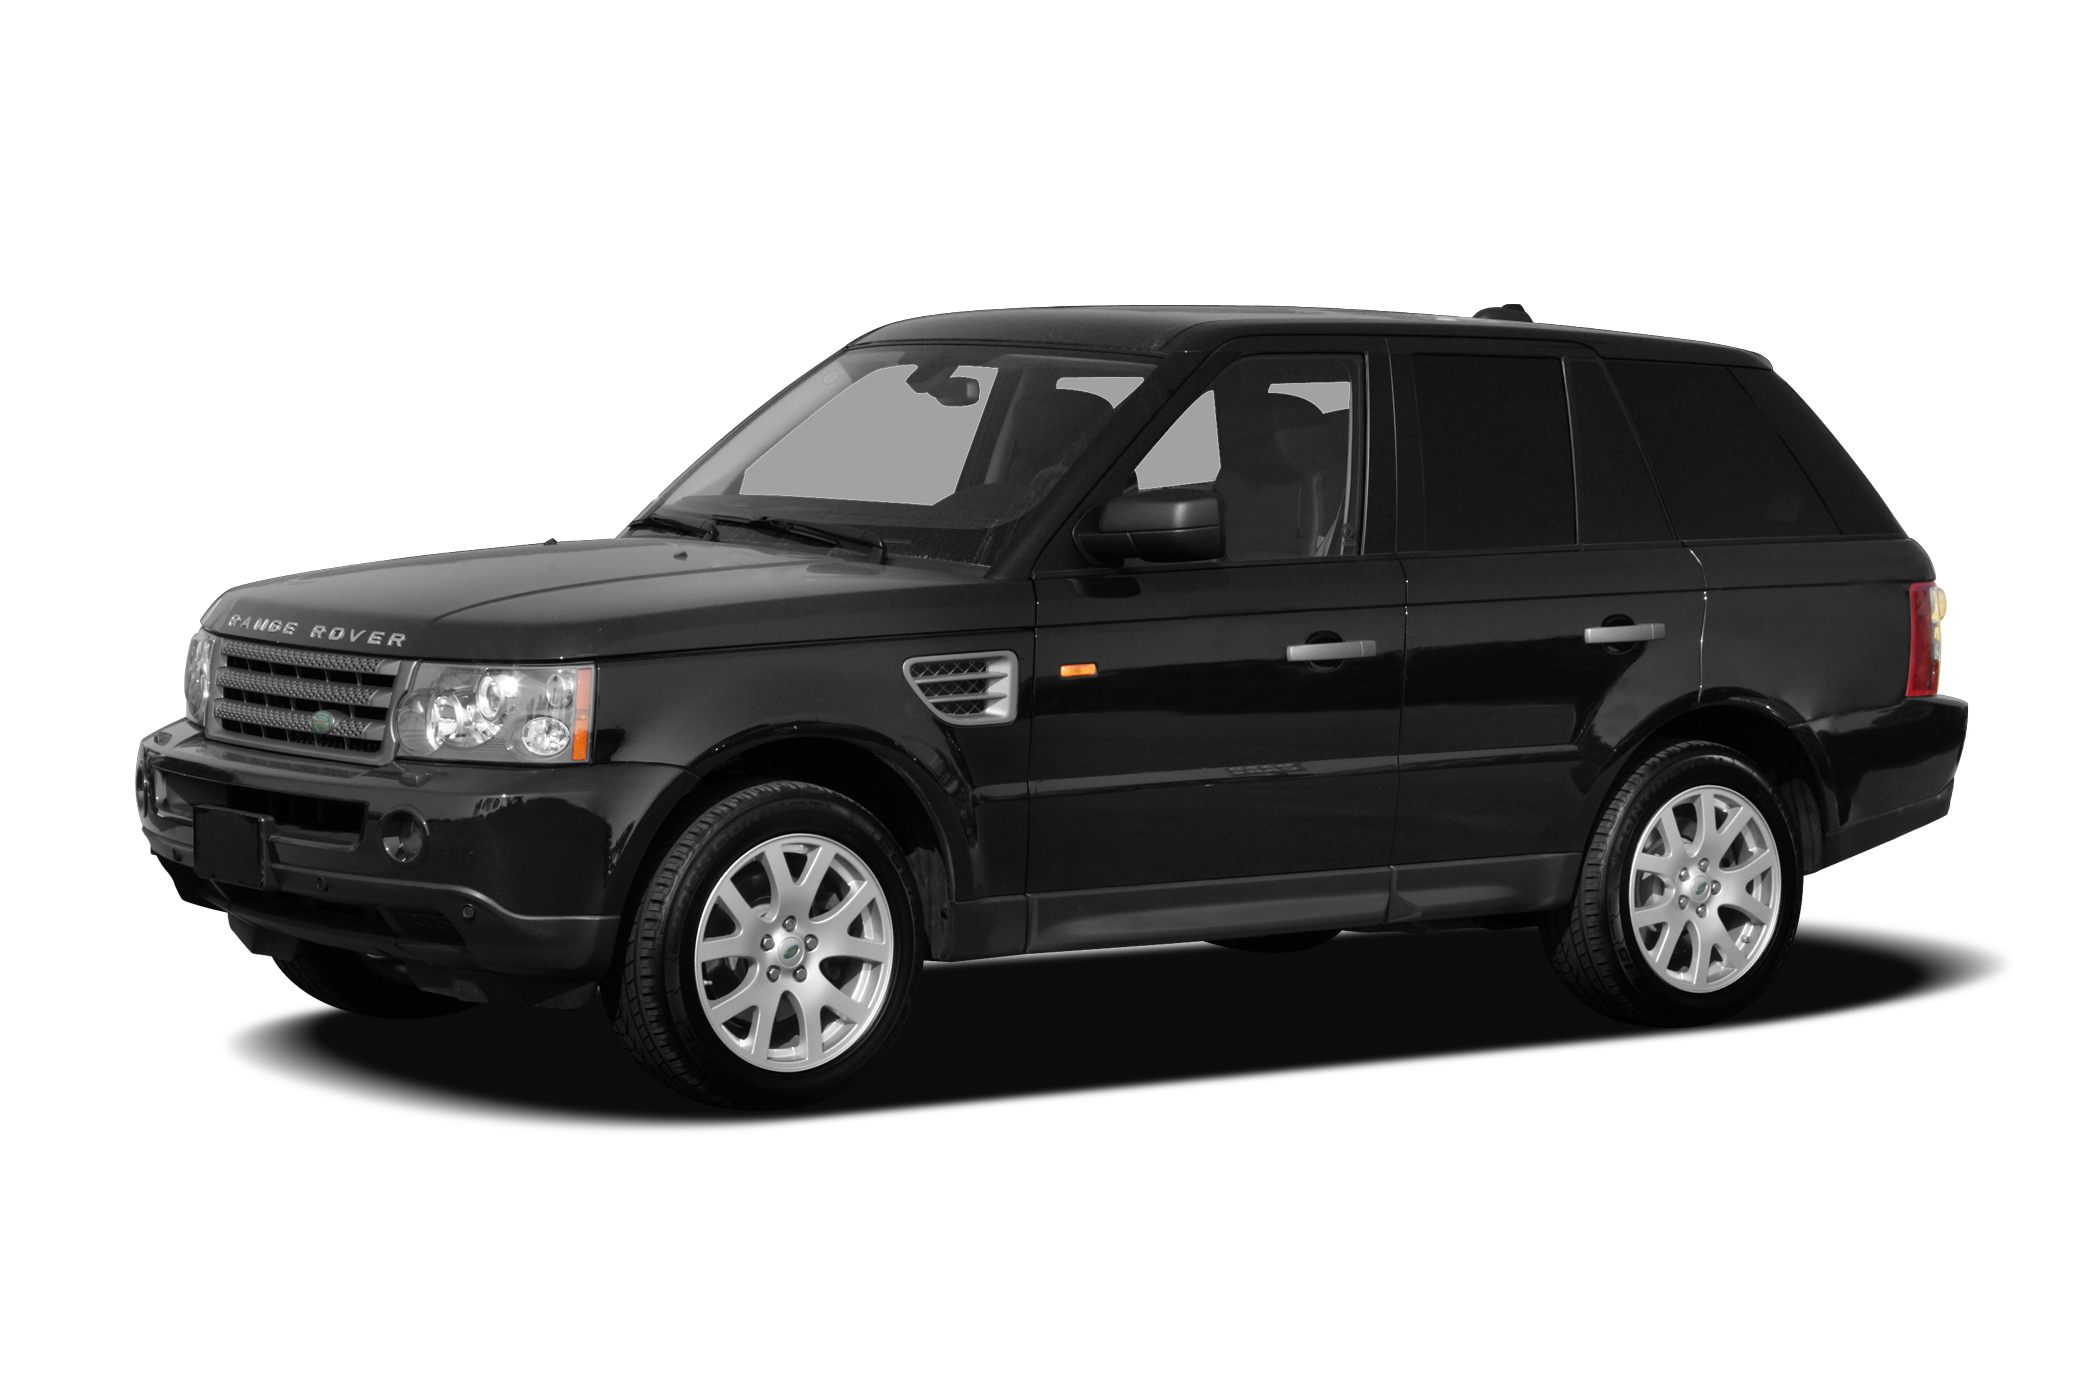 2007 Land Rover Range Rover Hse 4dr All Wheel Drive Pictures